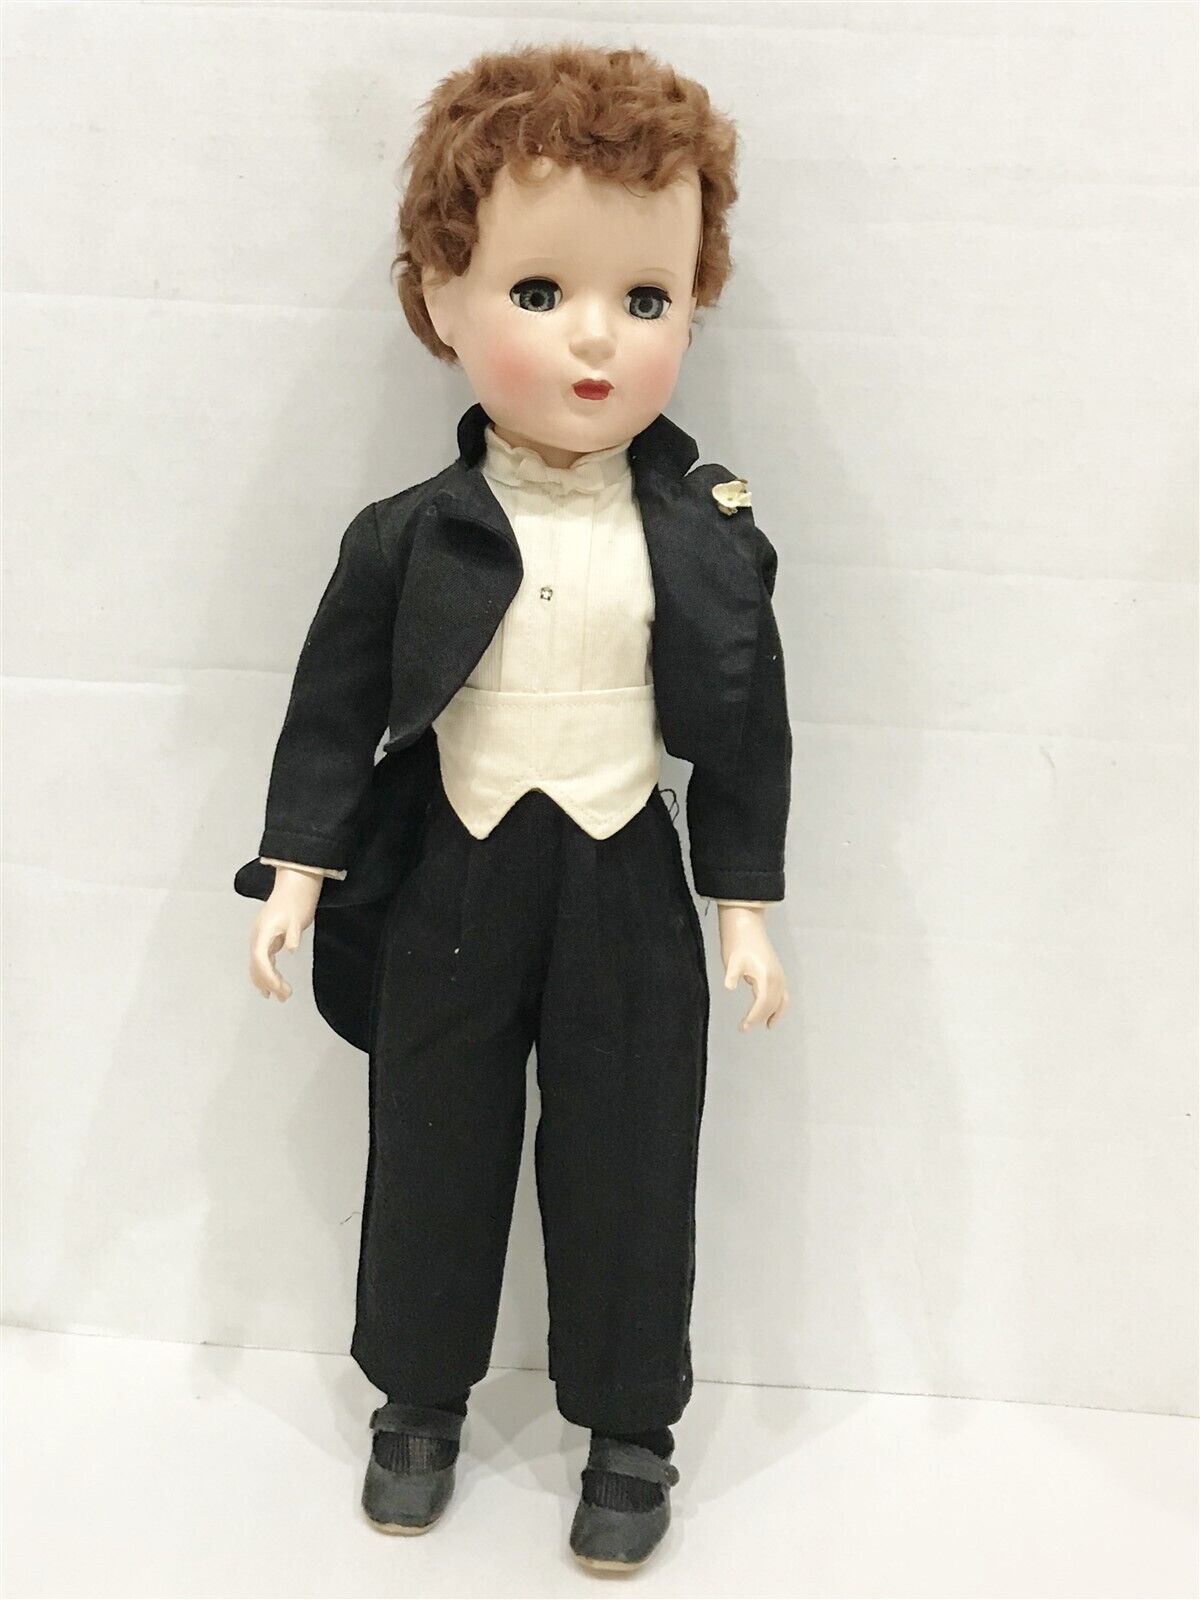 1950s MADAME ALEXANDER 17 INCH GROOM DOLL IN ORIGINAL OUTFIT COMPLETE ...